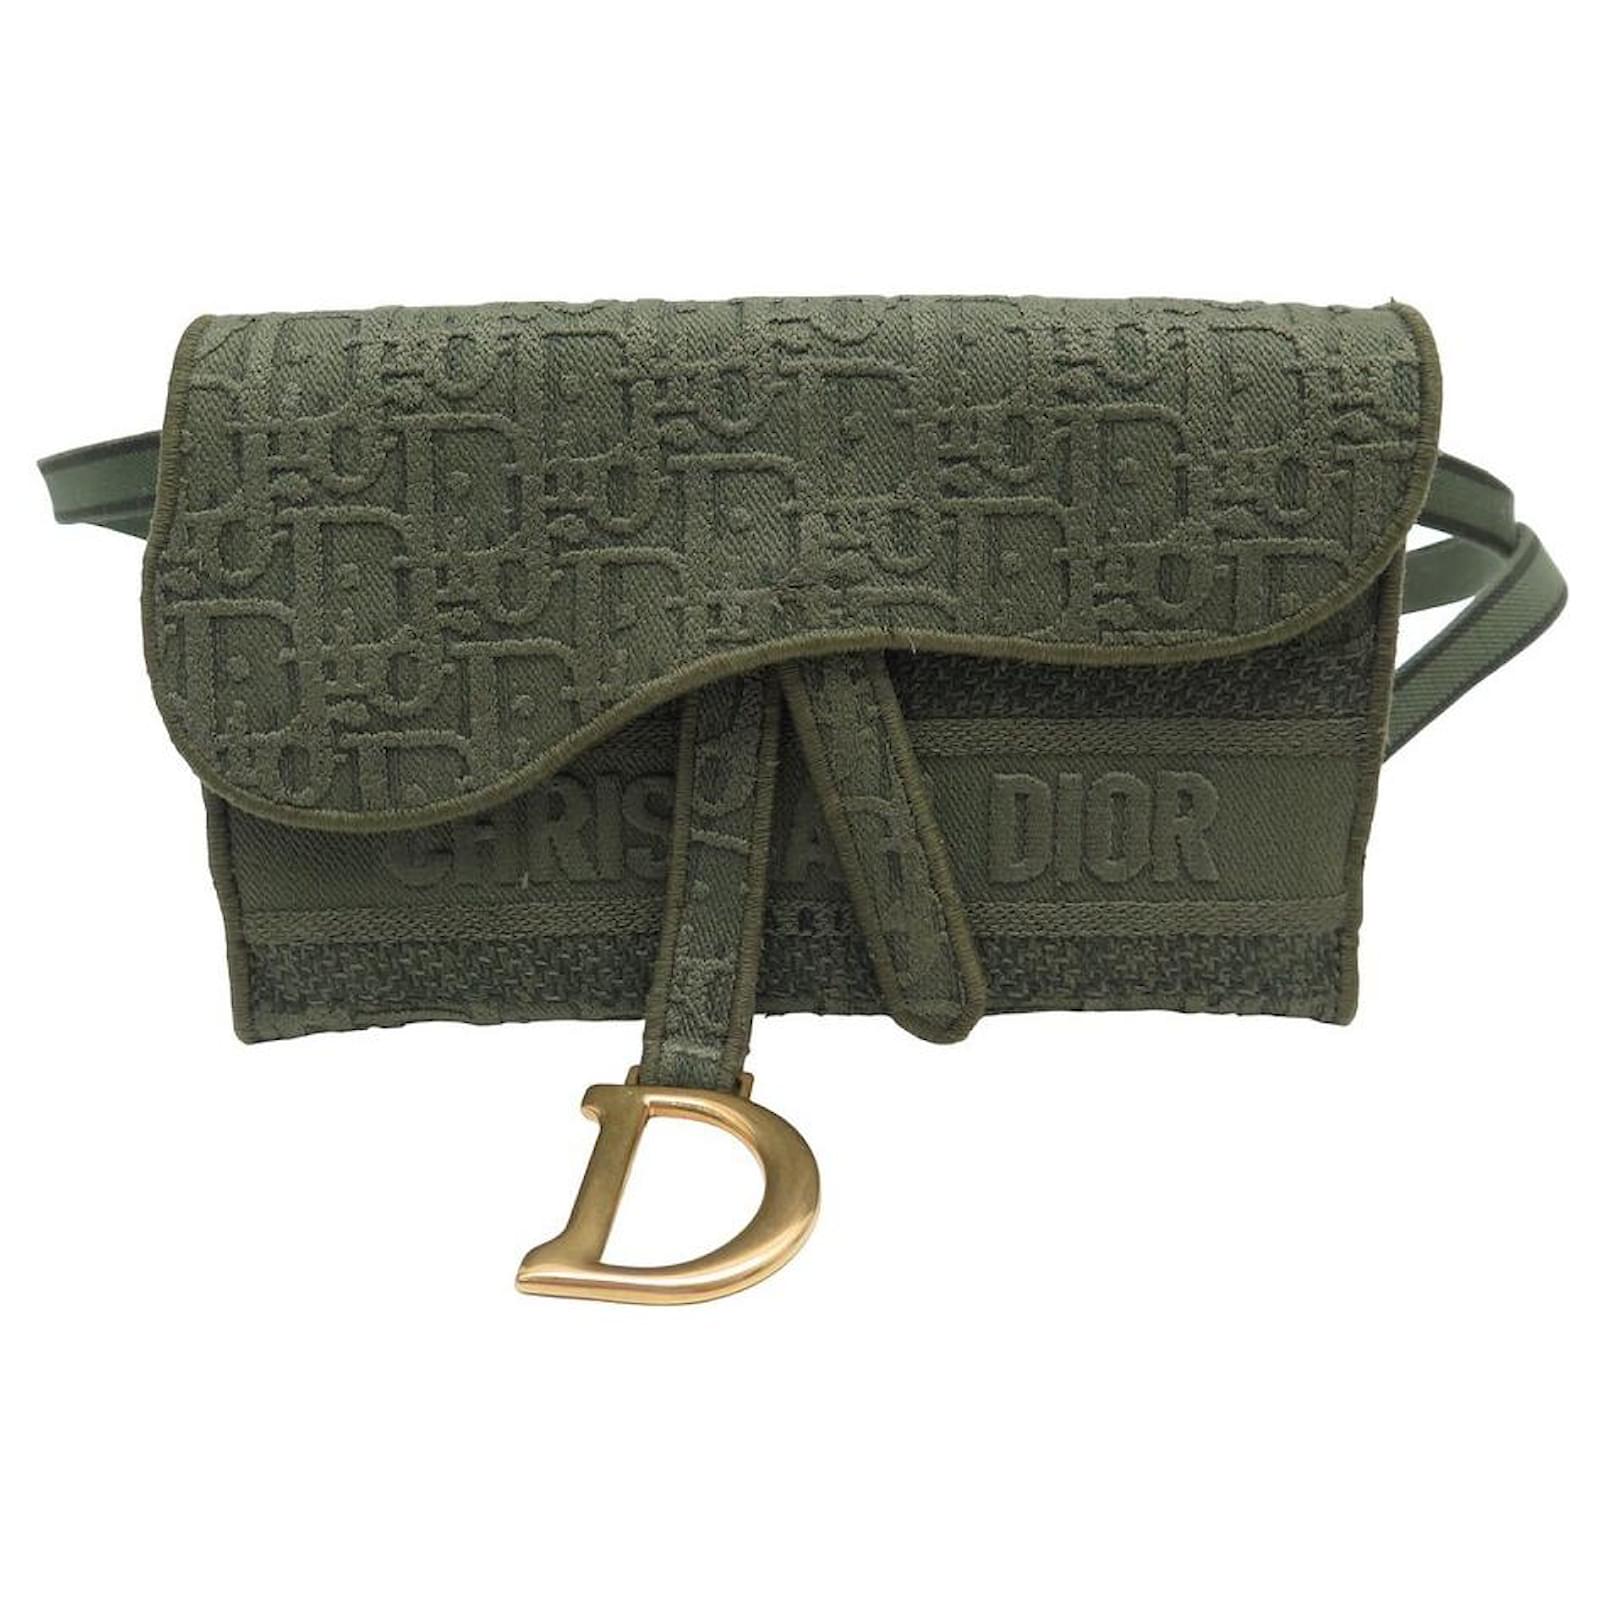 Christian Dior Trotter Waist Bag Pouch Fanny Pack Nylon Leather